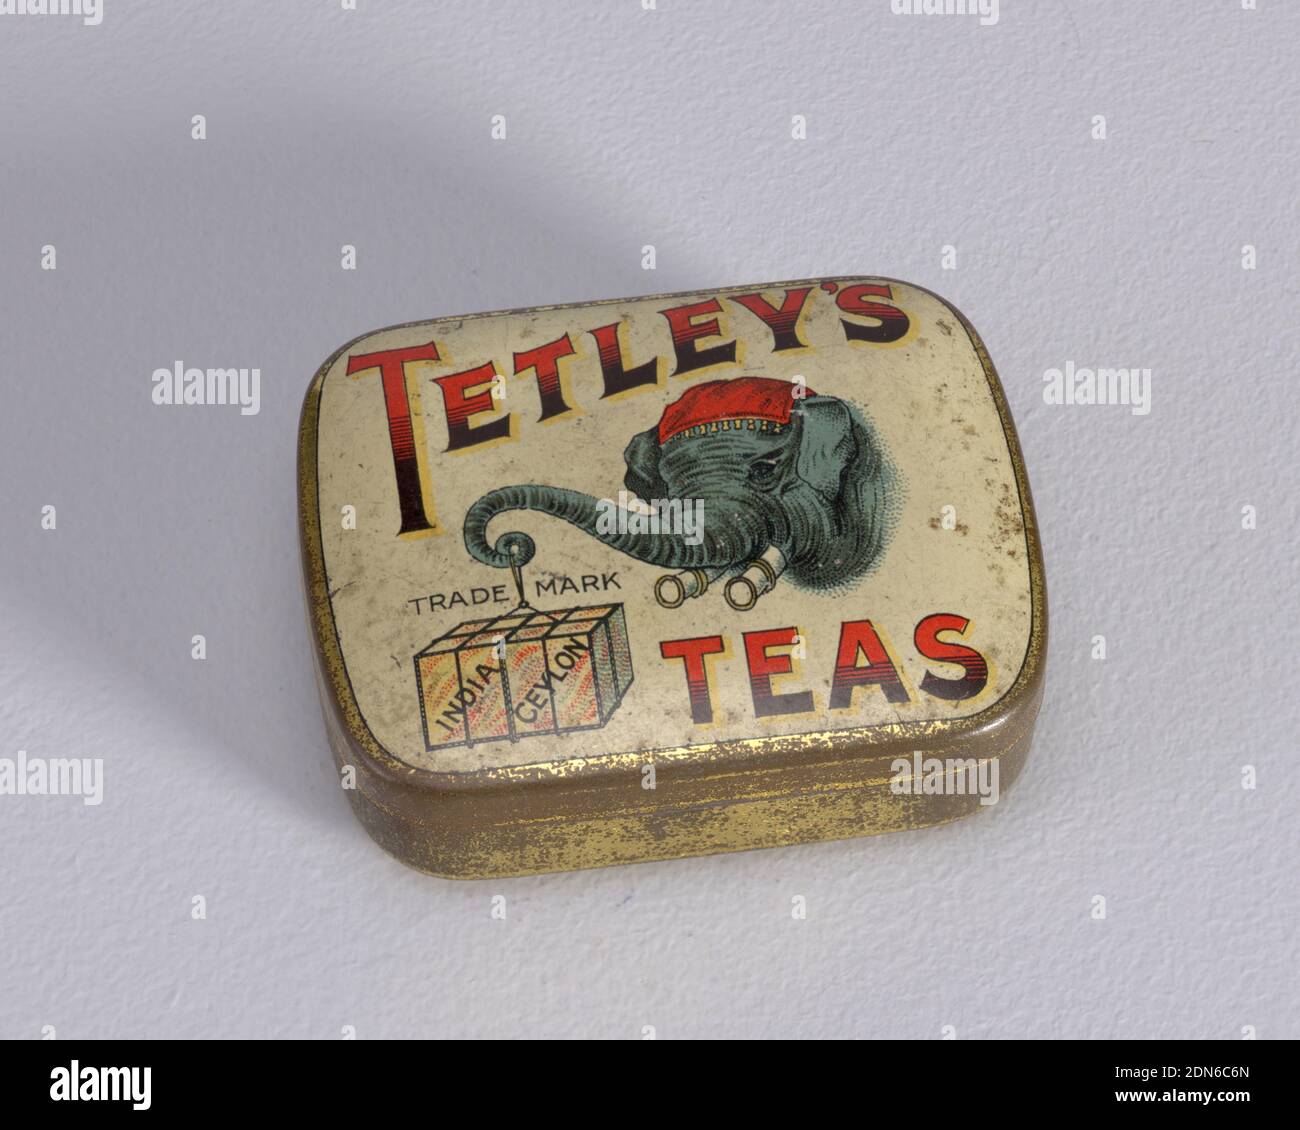 Advertisement for 'Tetley's Teas', Plated tin, enamel, Rectangular, rounded corners, with transfer printed decoration on lid, inscribed 'Tetley's Teas' in large red and black type-face, highlighted in yellow, featuring central image of blue elephant's head with red kerchief, elephant holds at end of curled trunk box on a string, box inscribed 'Indian Ceylon,' above box inscription reads 'Trade Mark,' all on off-white ground, edges, sides and underside gold. Lid hinged at back. Striker on underside., late 19th century, containers, Decorative Arts, Matchsafe Stock Photo